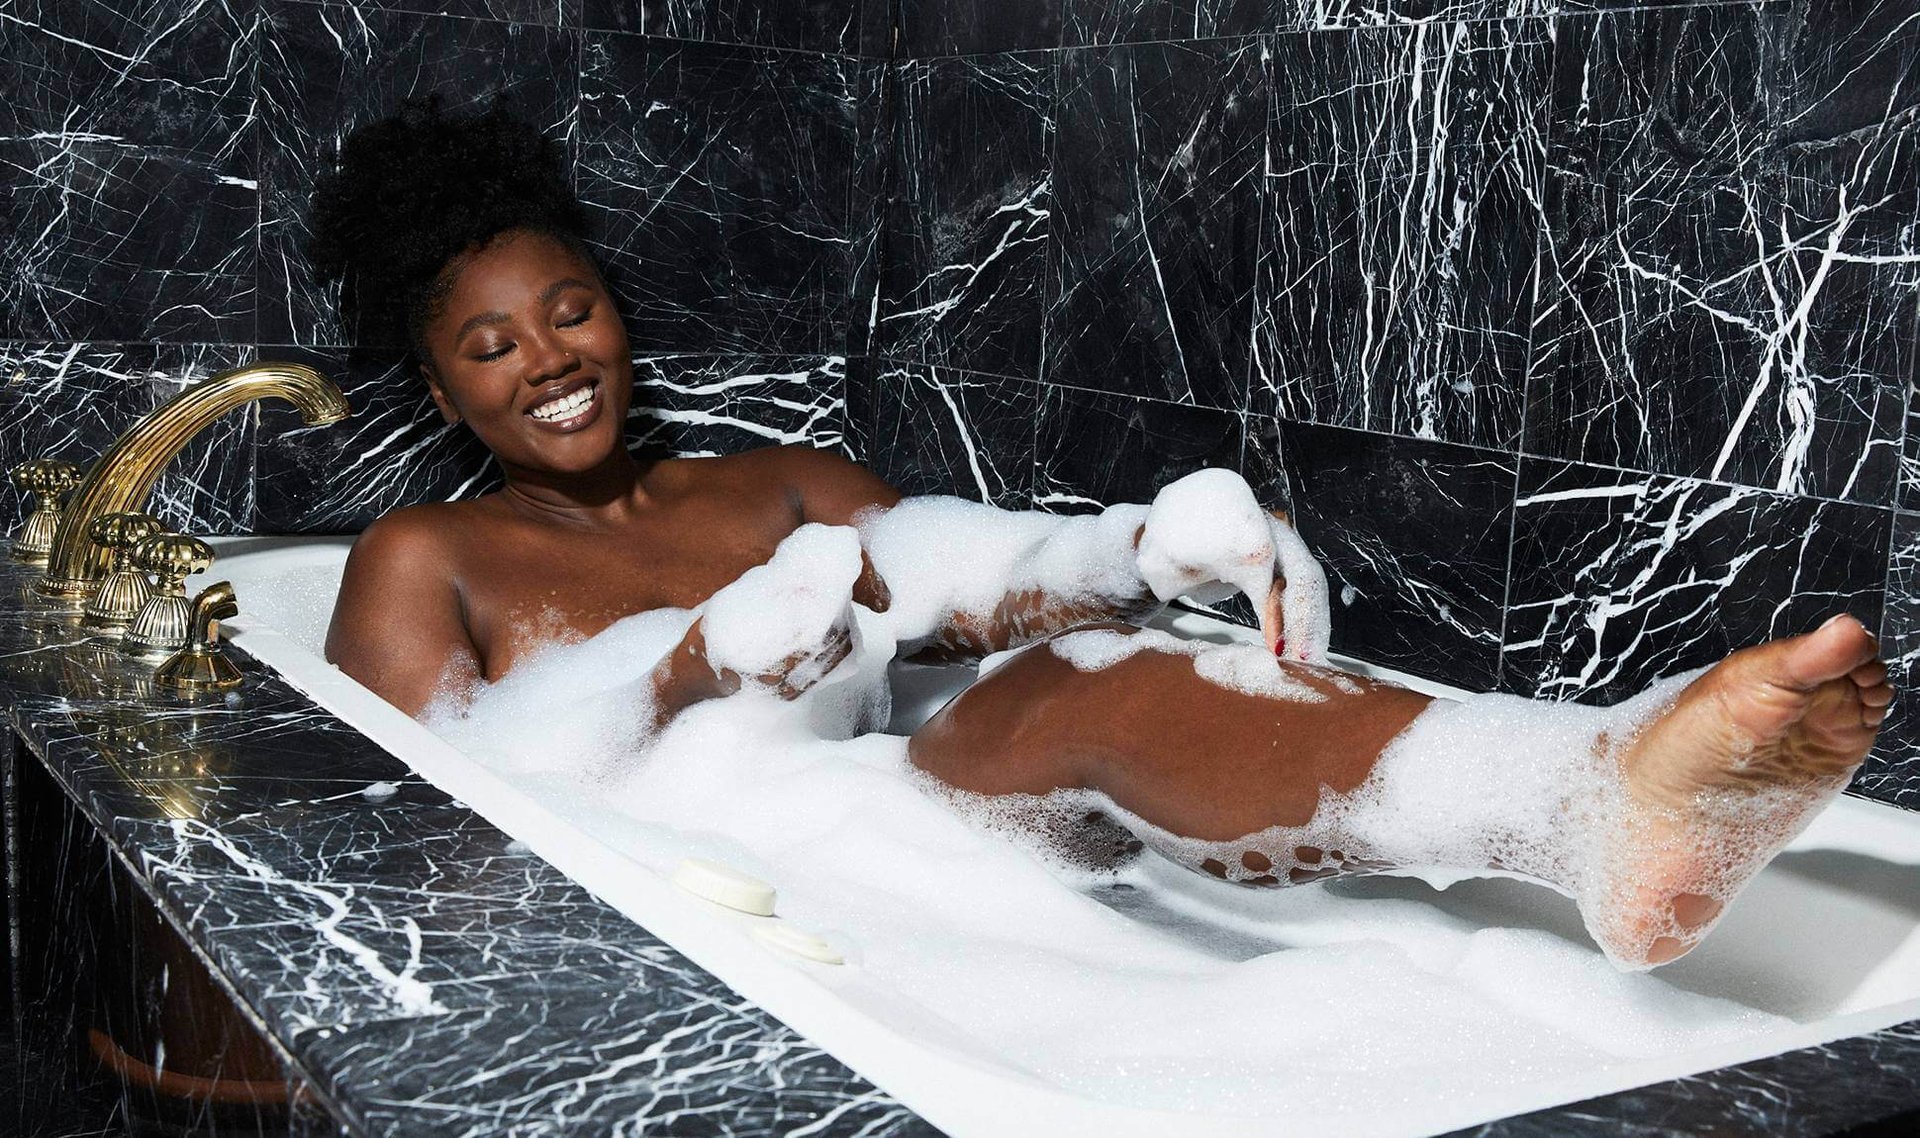 person in bathtub filled with water and bubbles